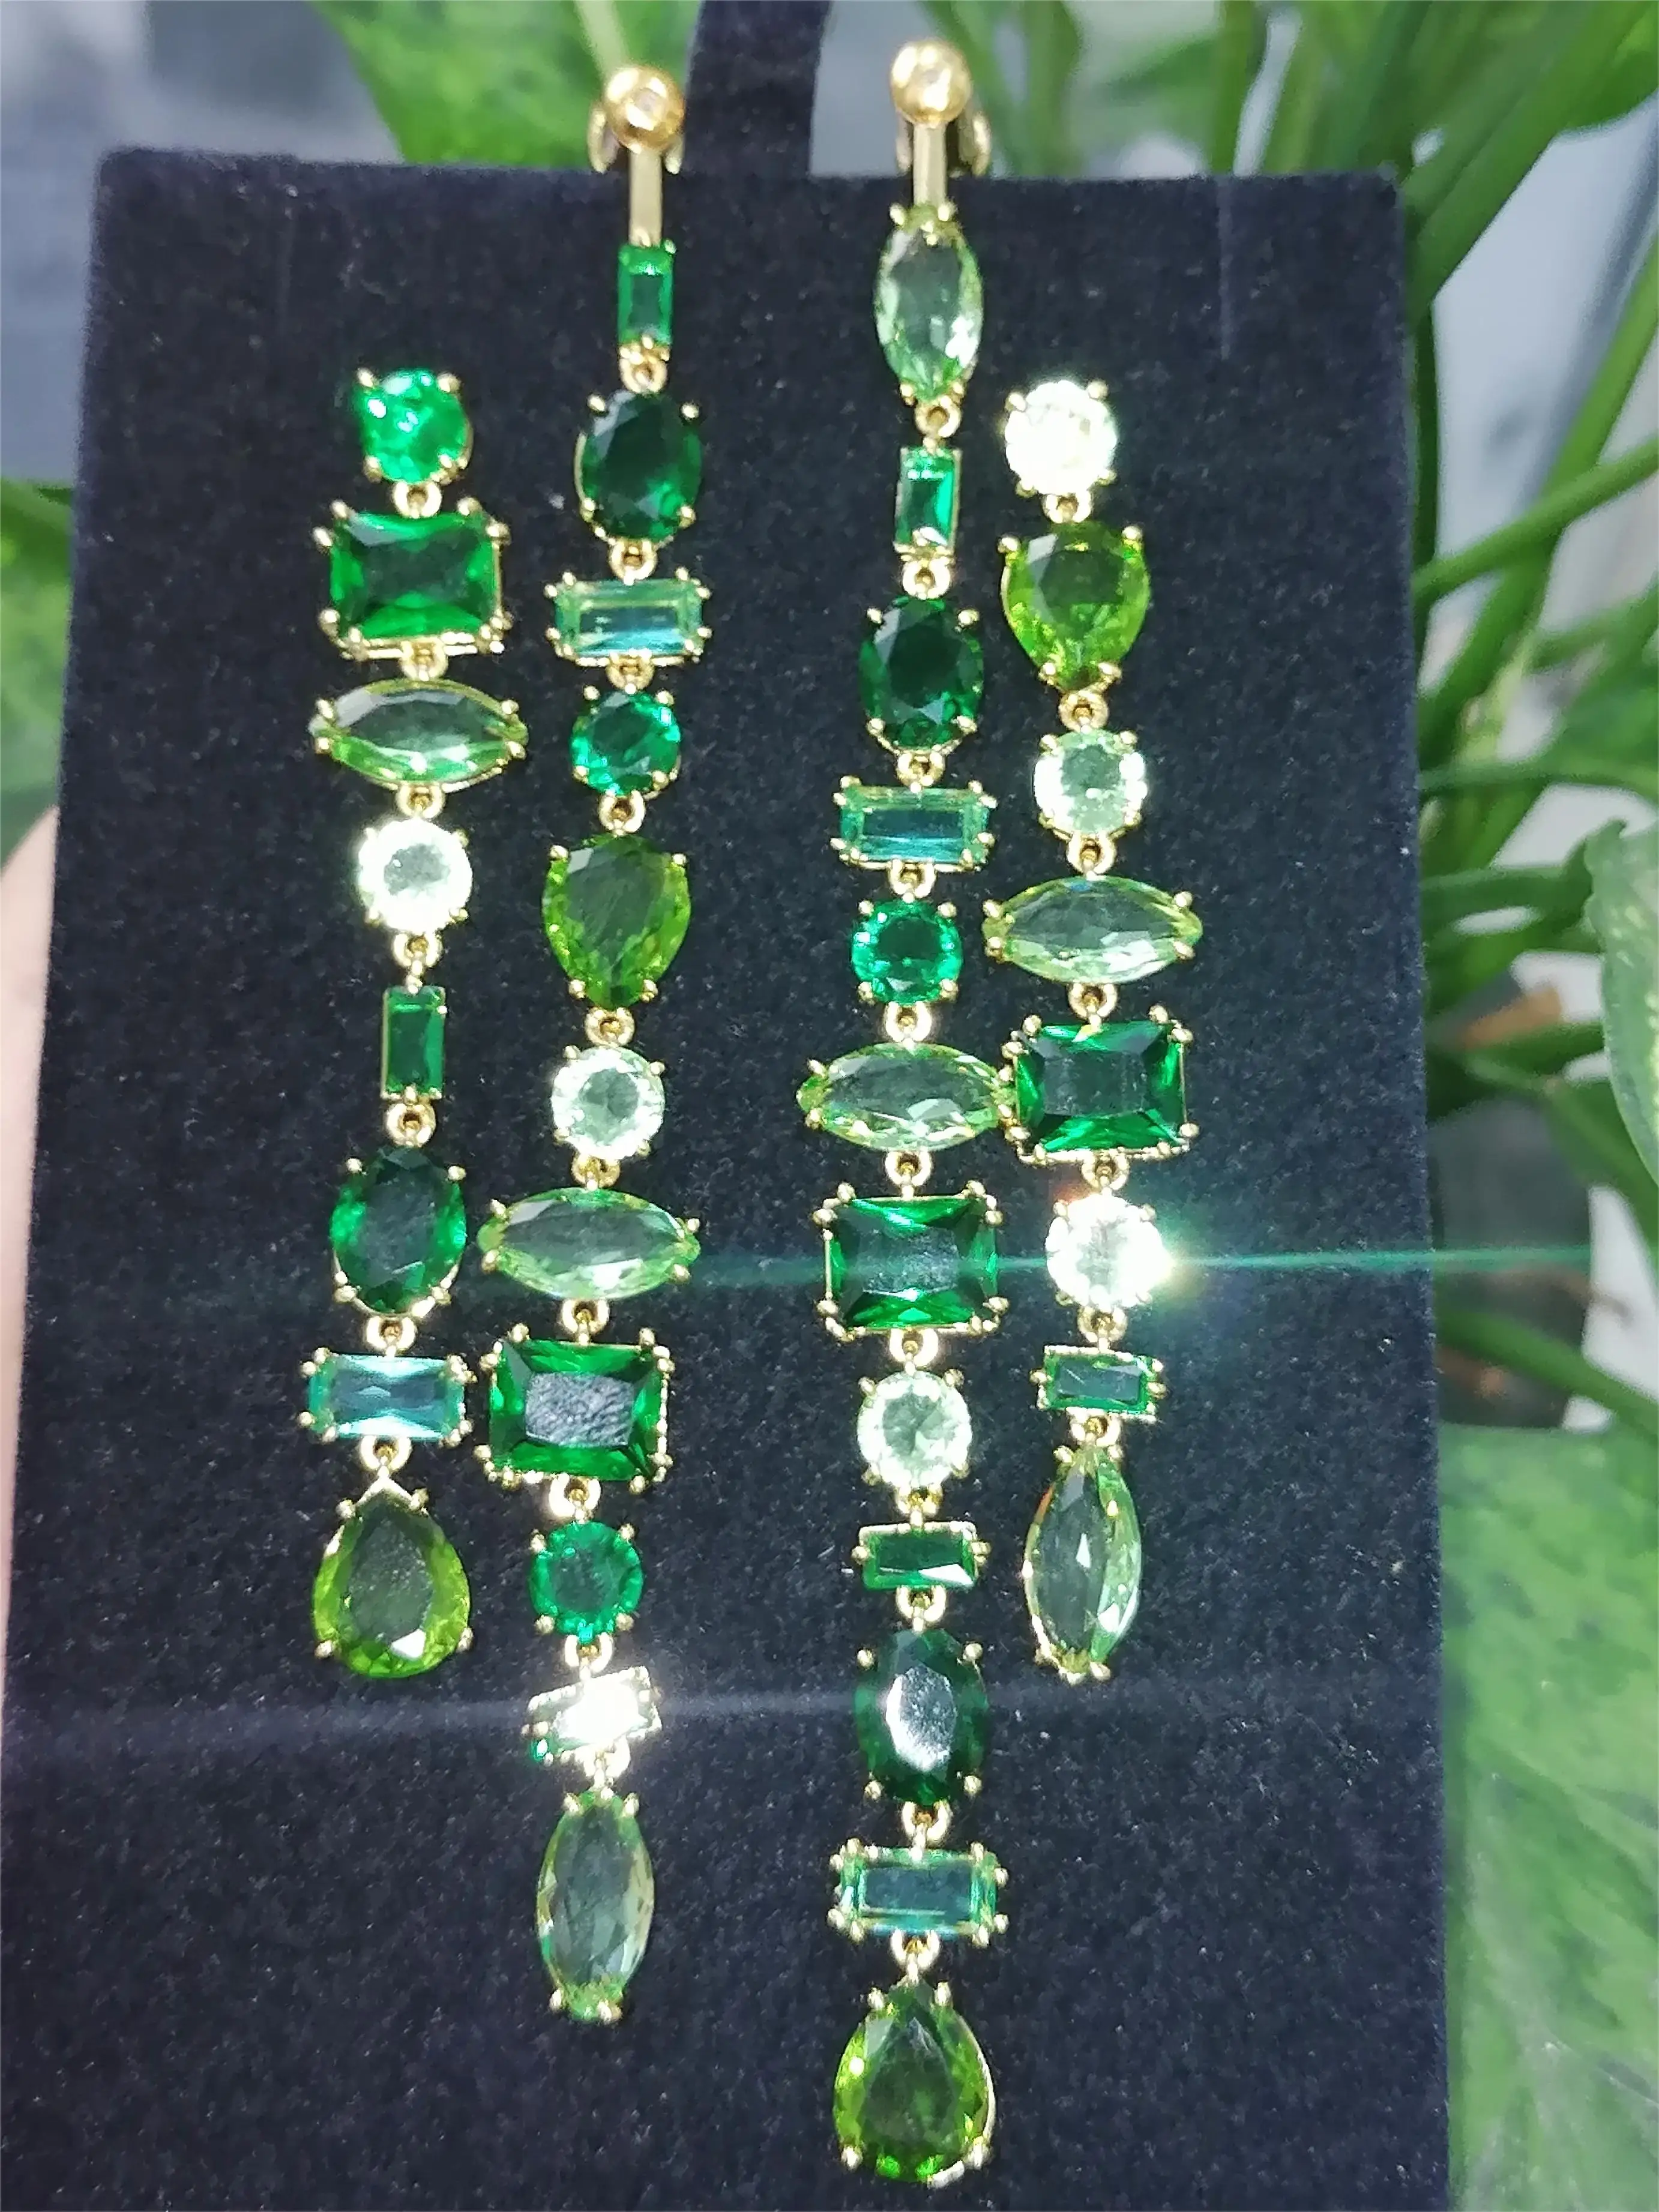 Original Lucent 2024 Fine Jewelry Sets Charming Luxury Green Crystal Millenia Women's Necklaces Bracelet Earrings Ring With Logo